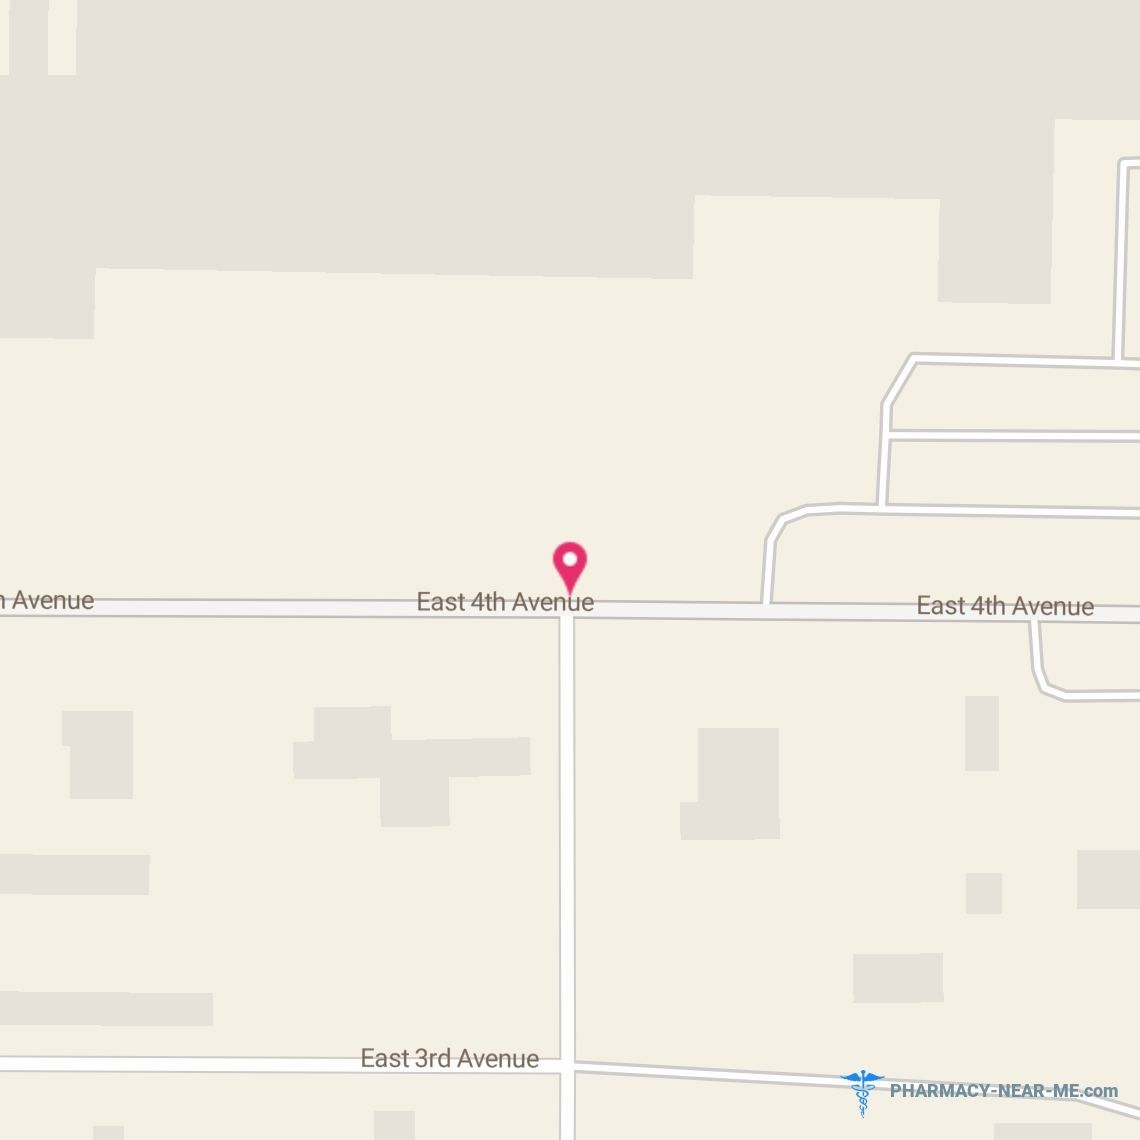 PPSRX - Pharmacy Hours, Phone, Reviews & Information: 2700 East 4th Avenue, Hutchinson, Kansas 67501, United States